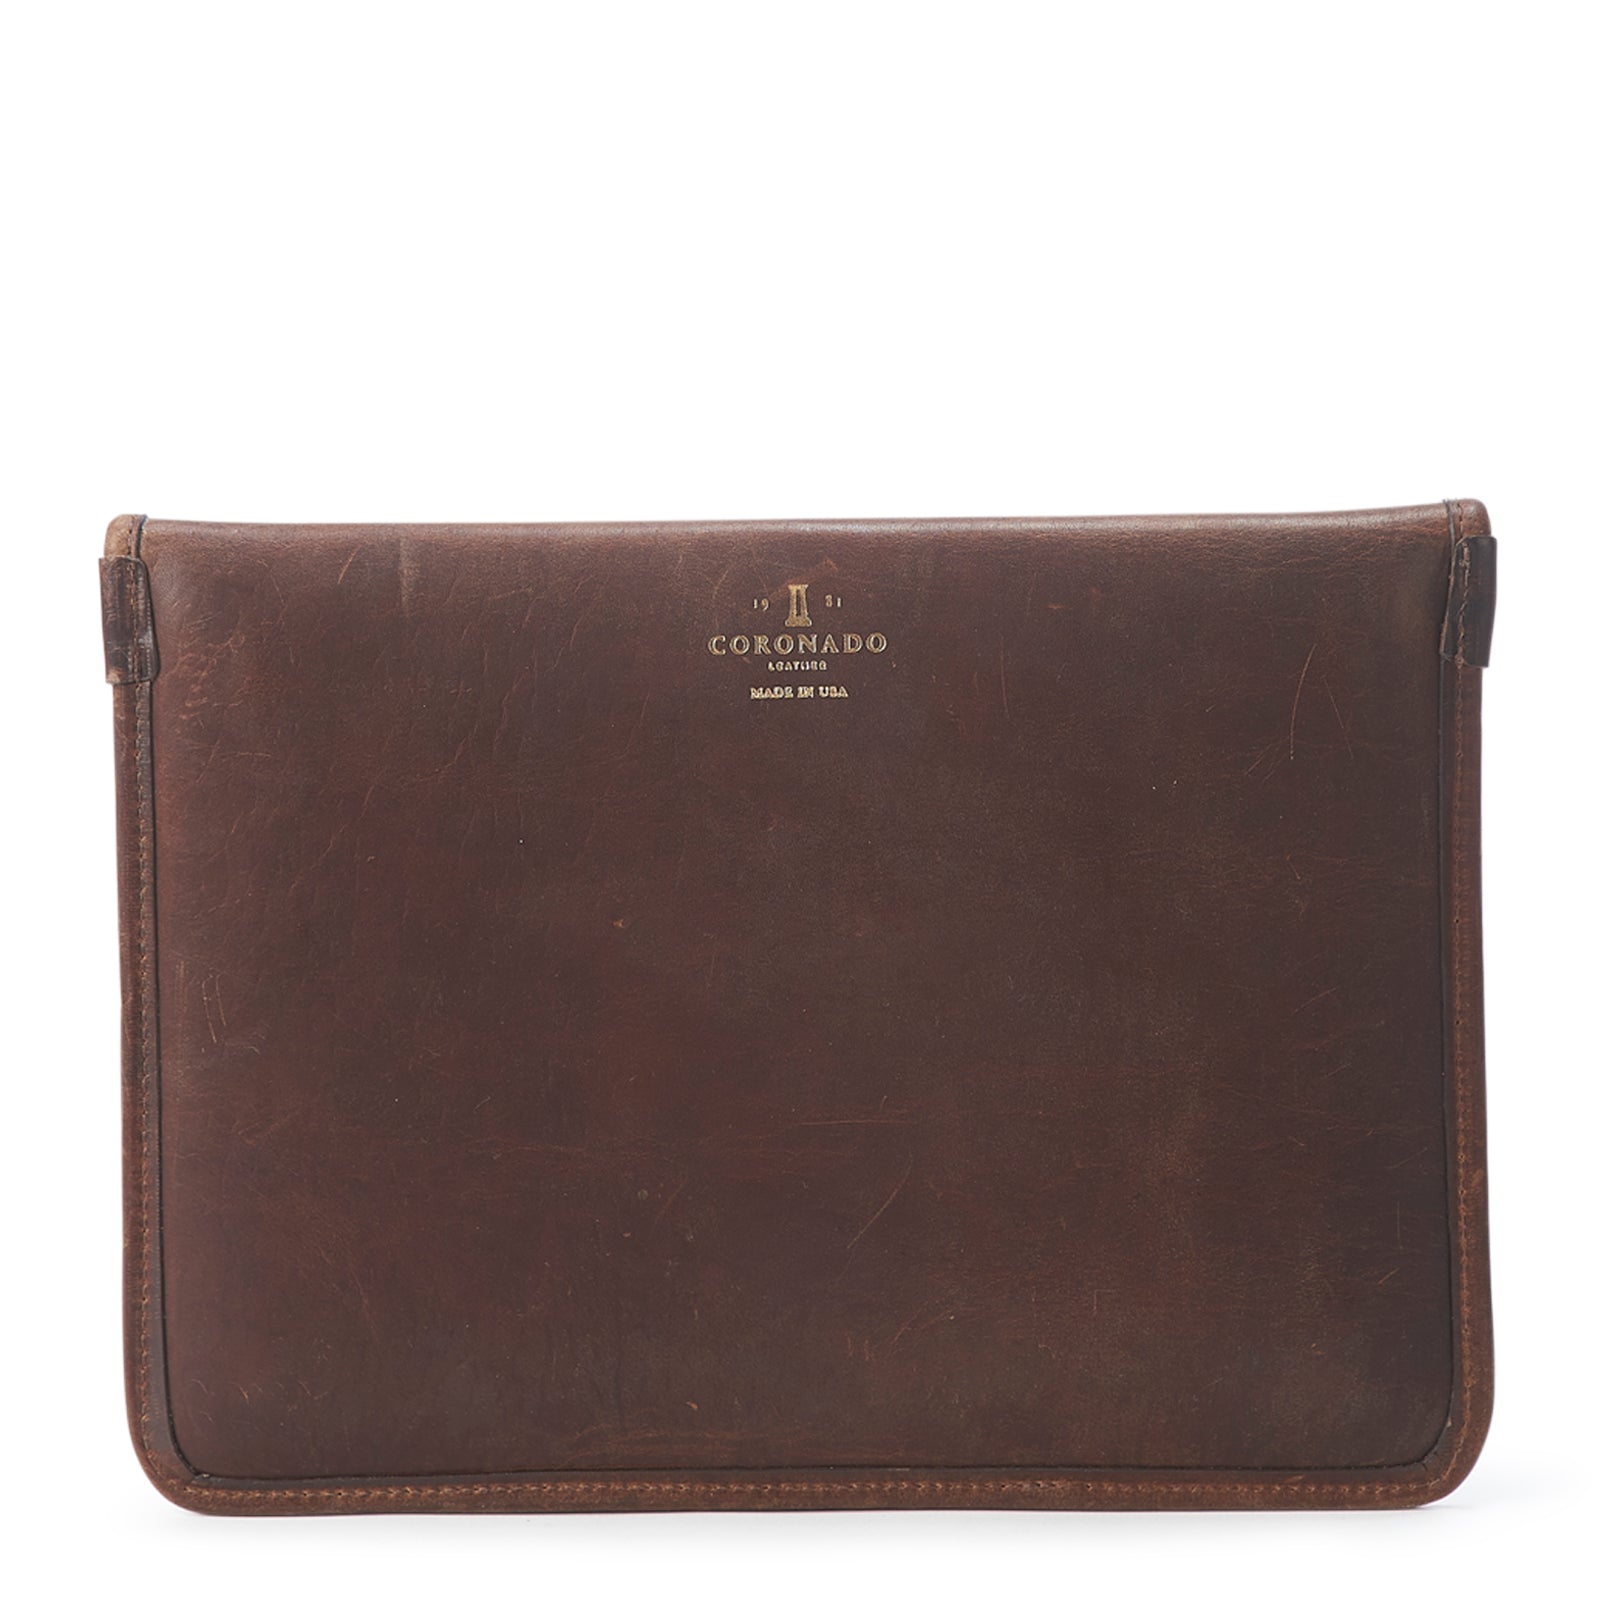 Dublin Envelope Cases (No. 901-905)  (Limited Edition)